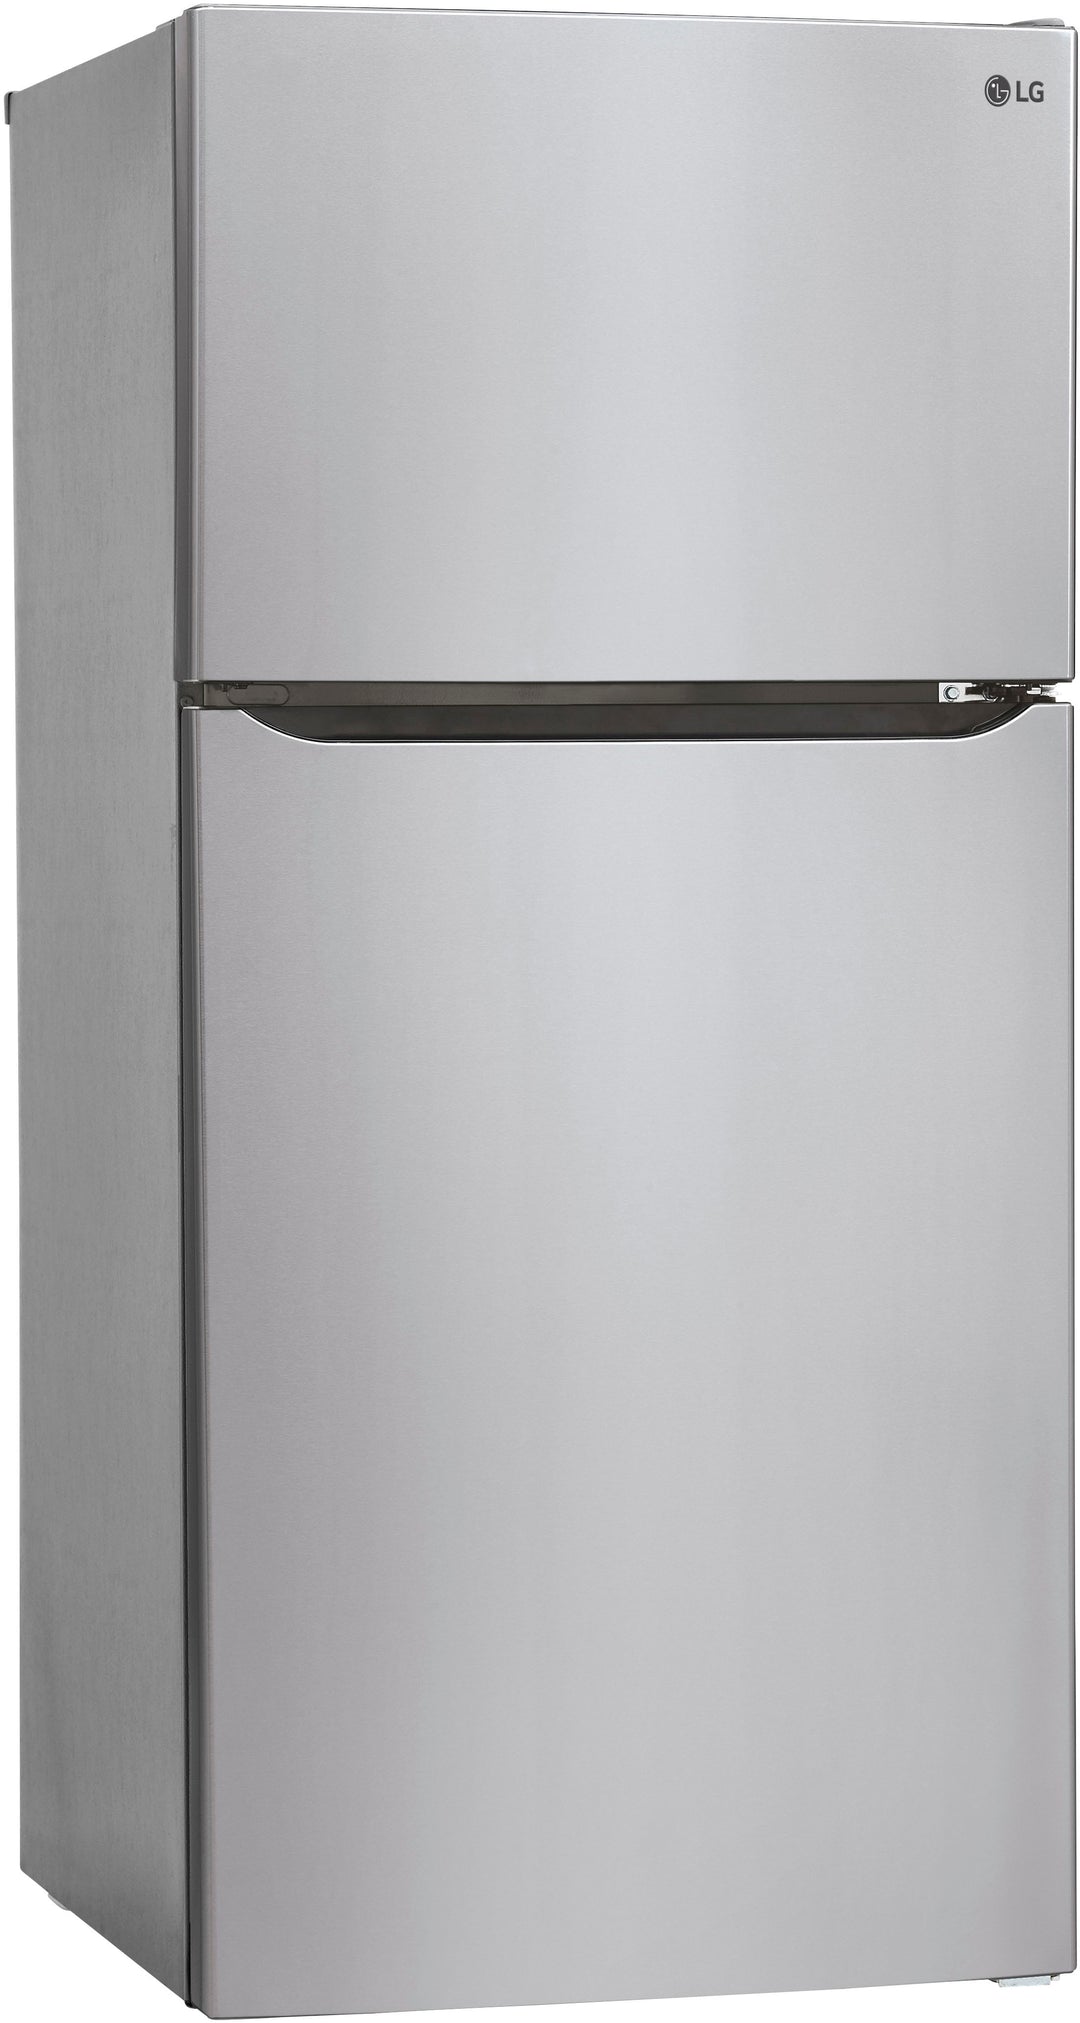 LG - 23.8 Cu Ft Top Mount Refrigerator with Internal Water Dispenser - Stainless steel_6